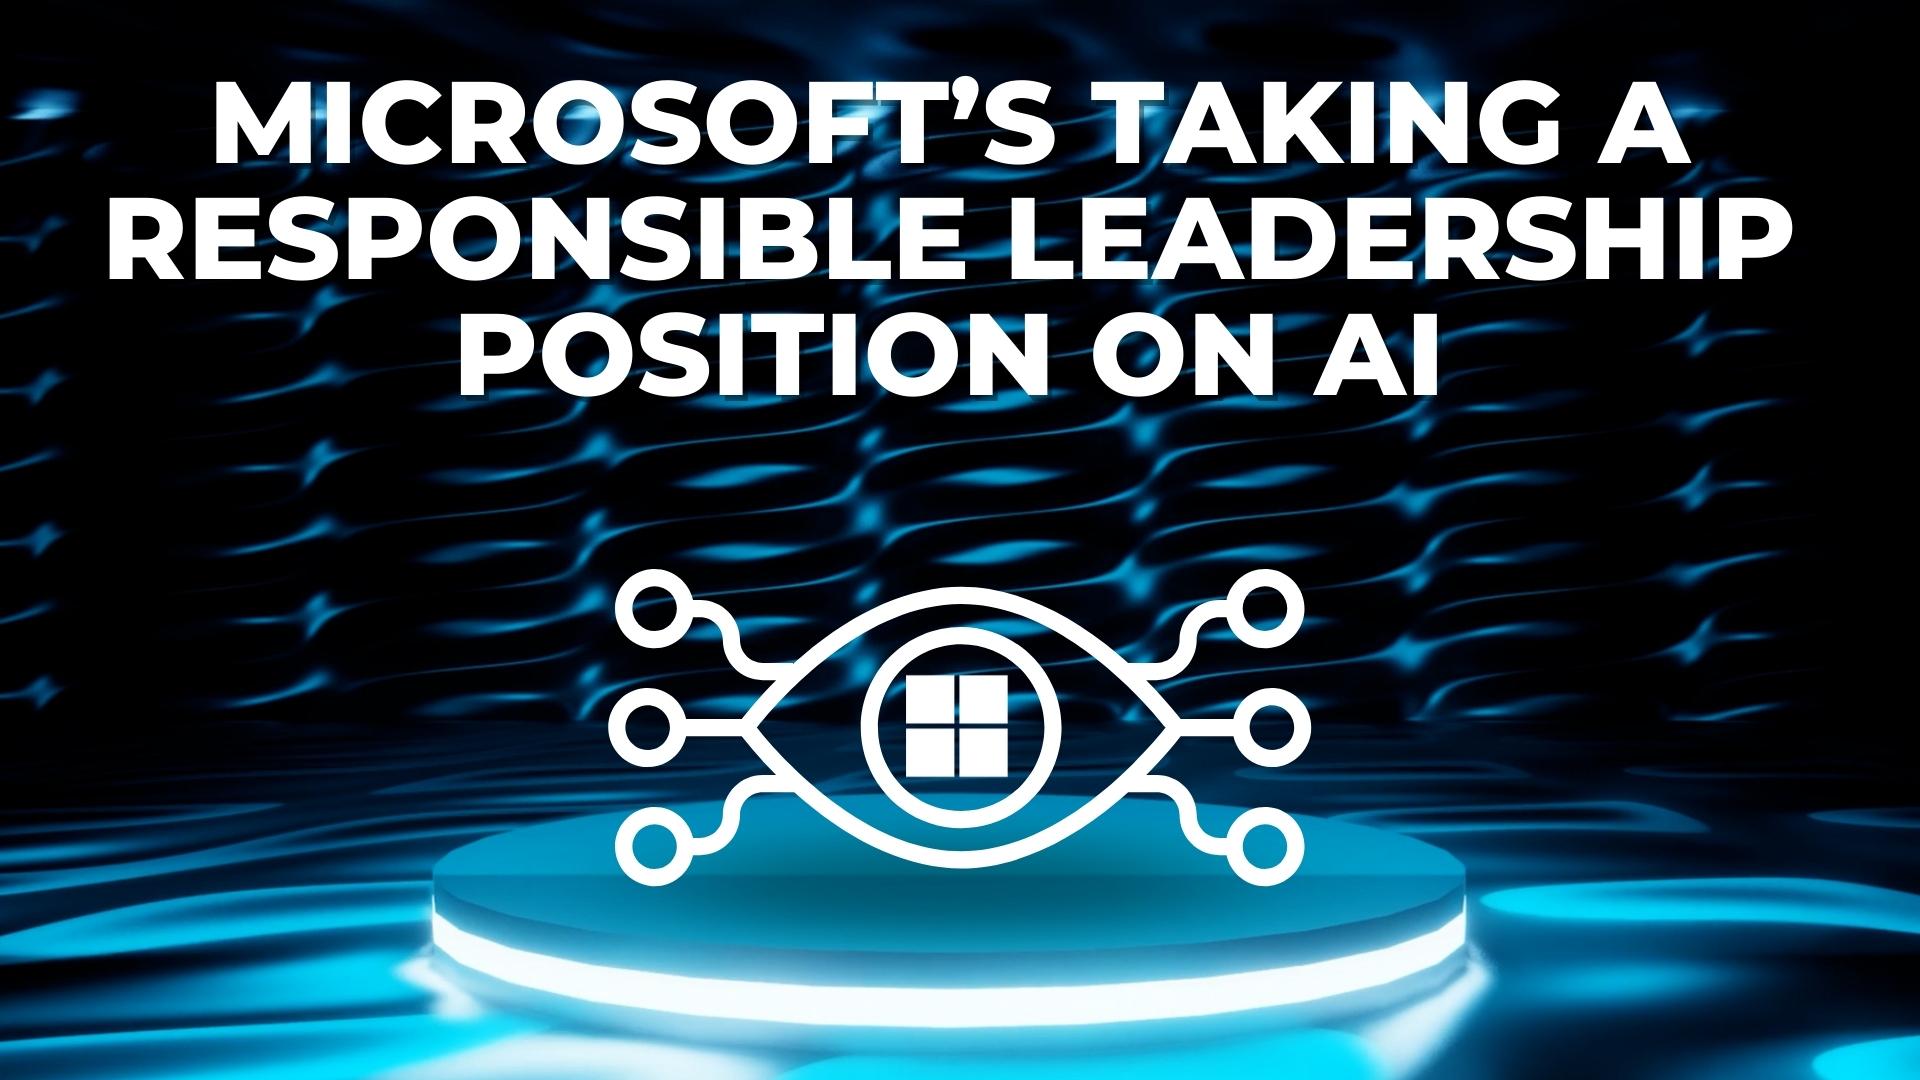 Microsoft's taking a resonsible leadership position on AI